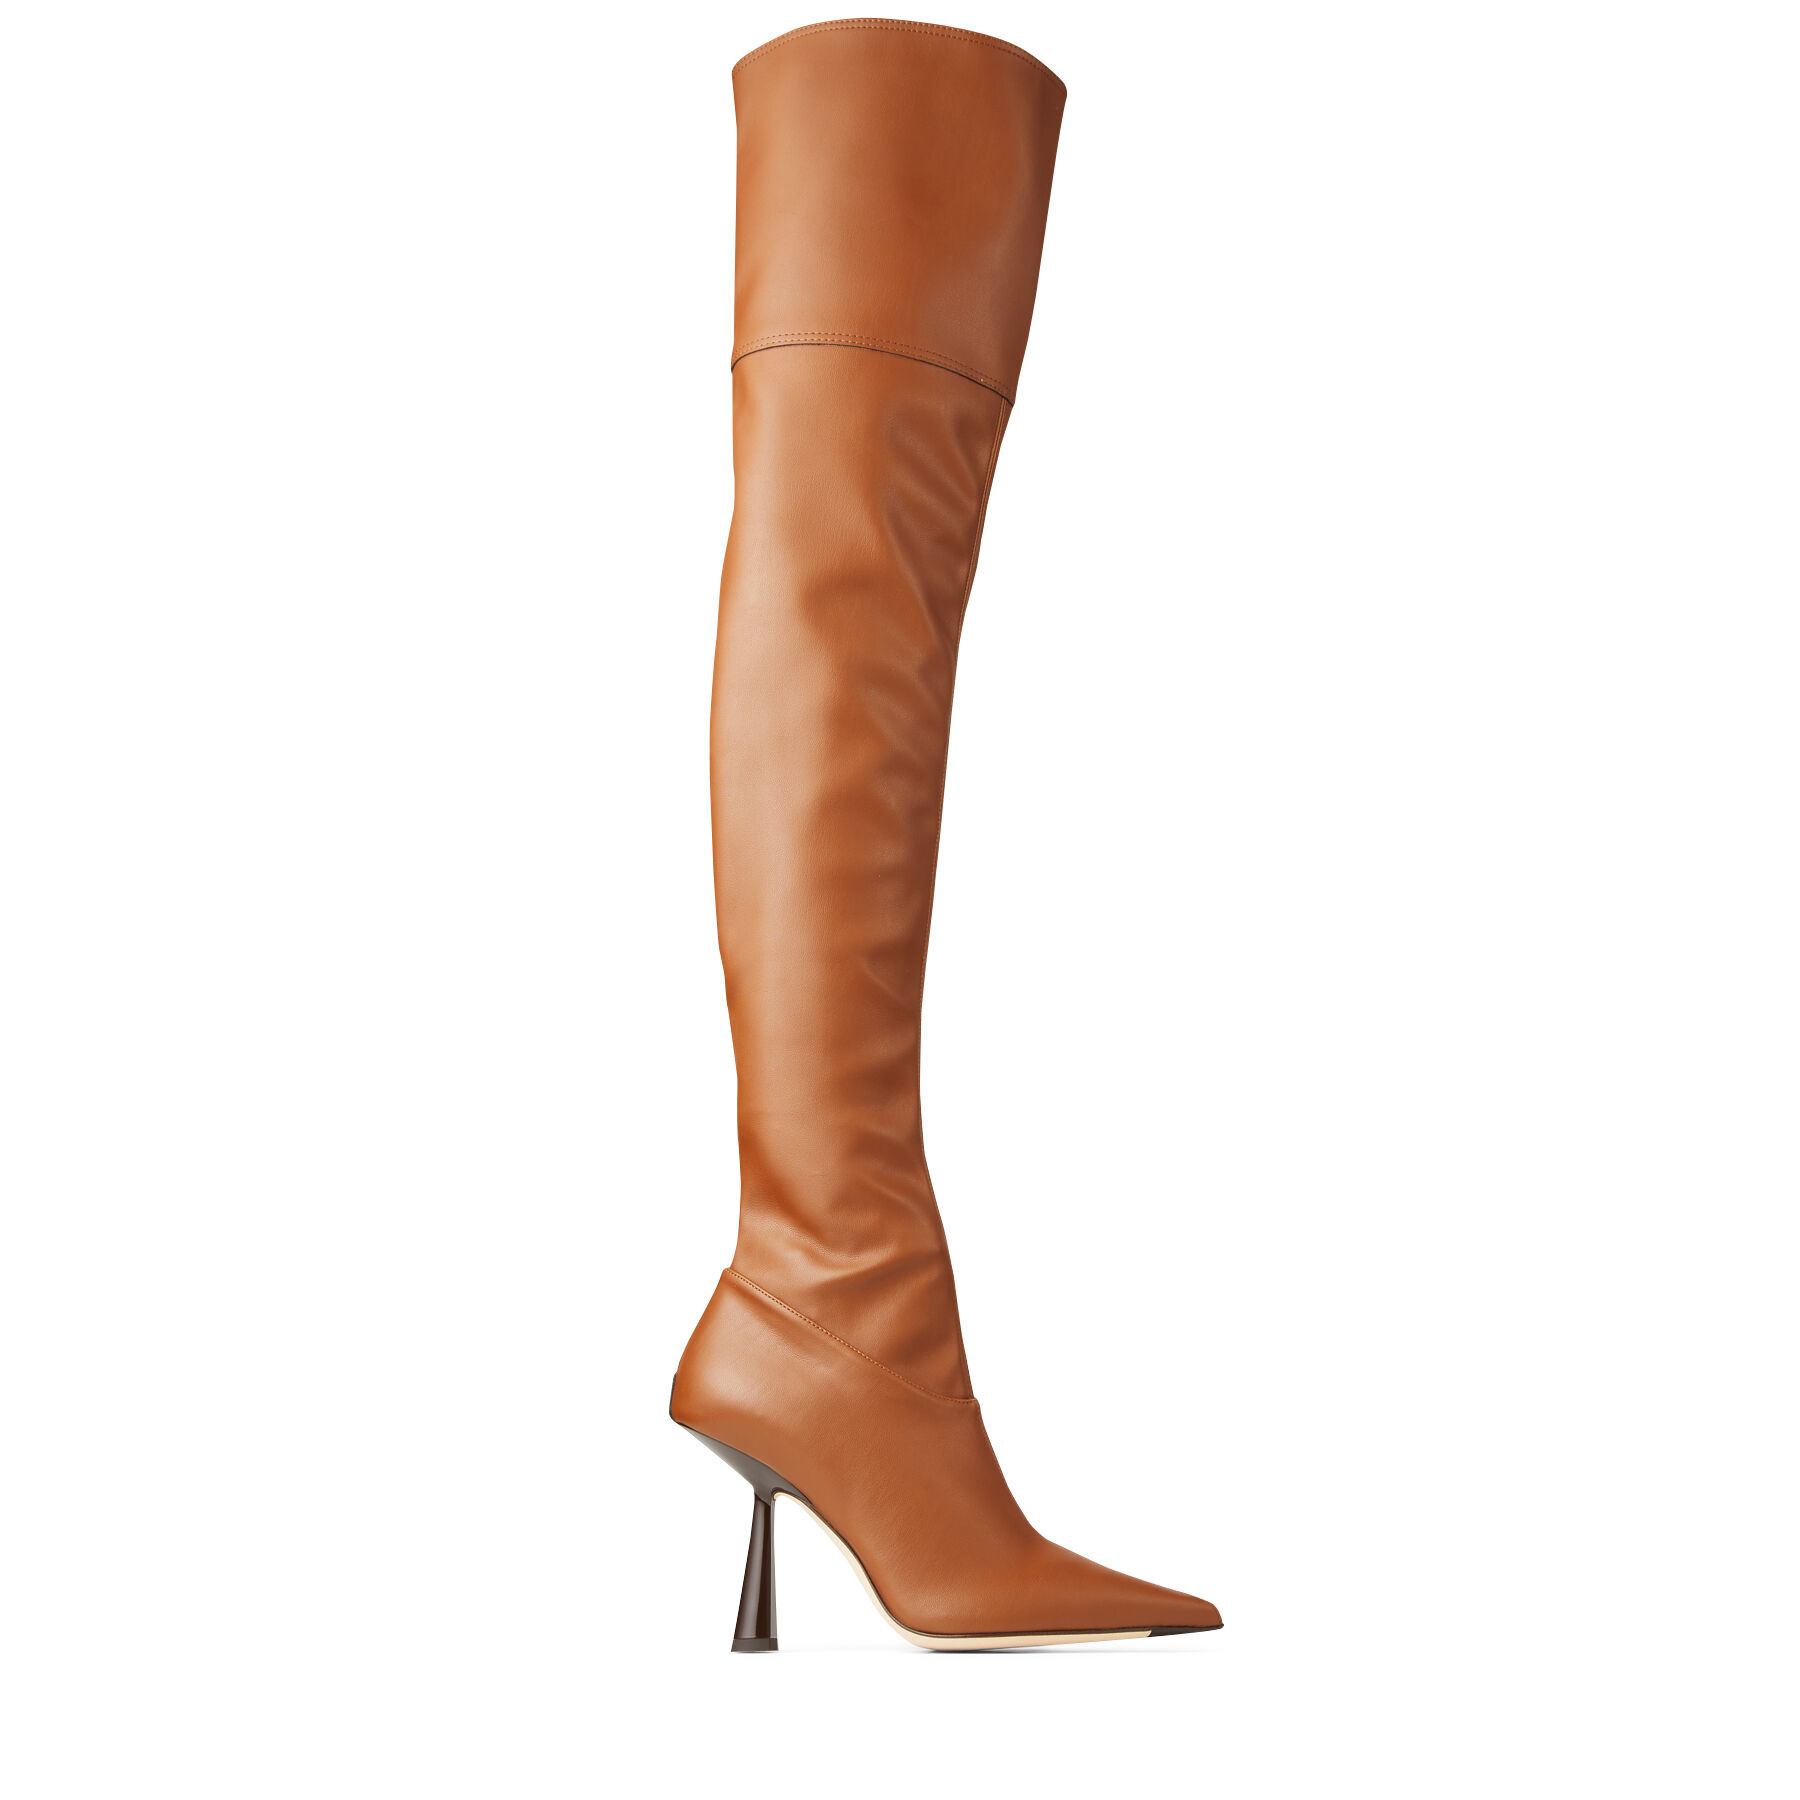 Bryson 100 Tan Stretch Bonded Fabric Over-The-Knee Boots